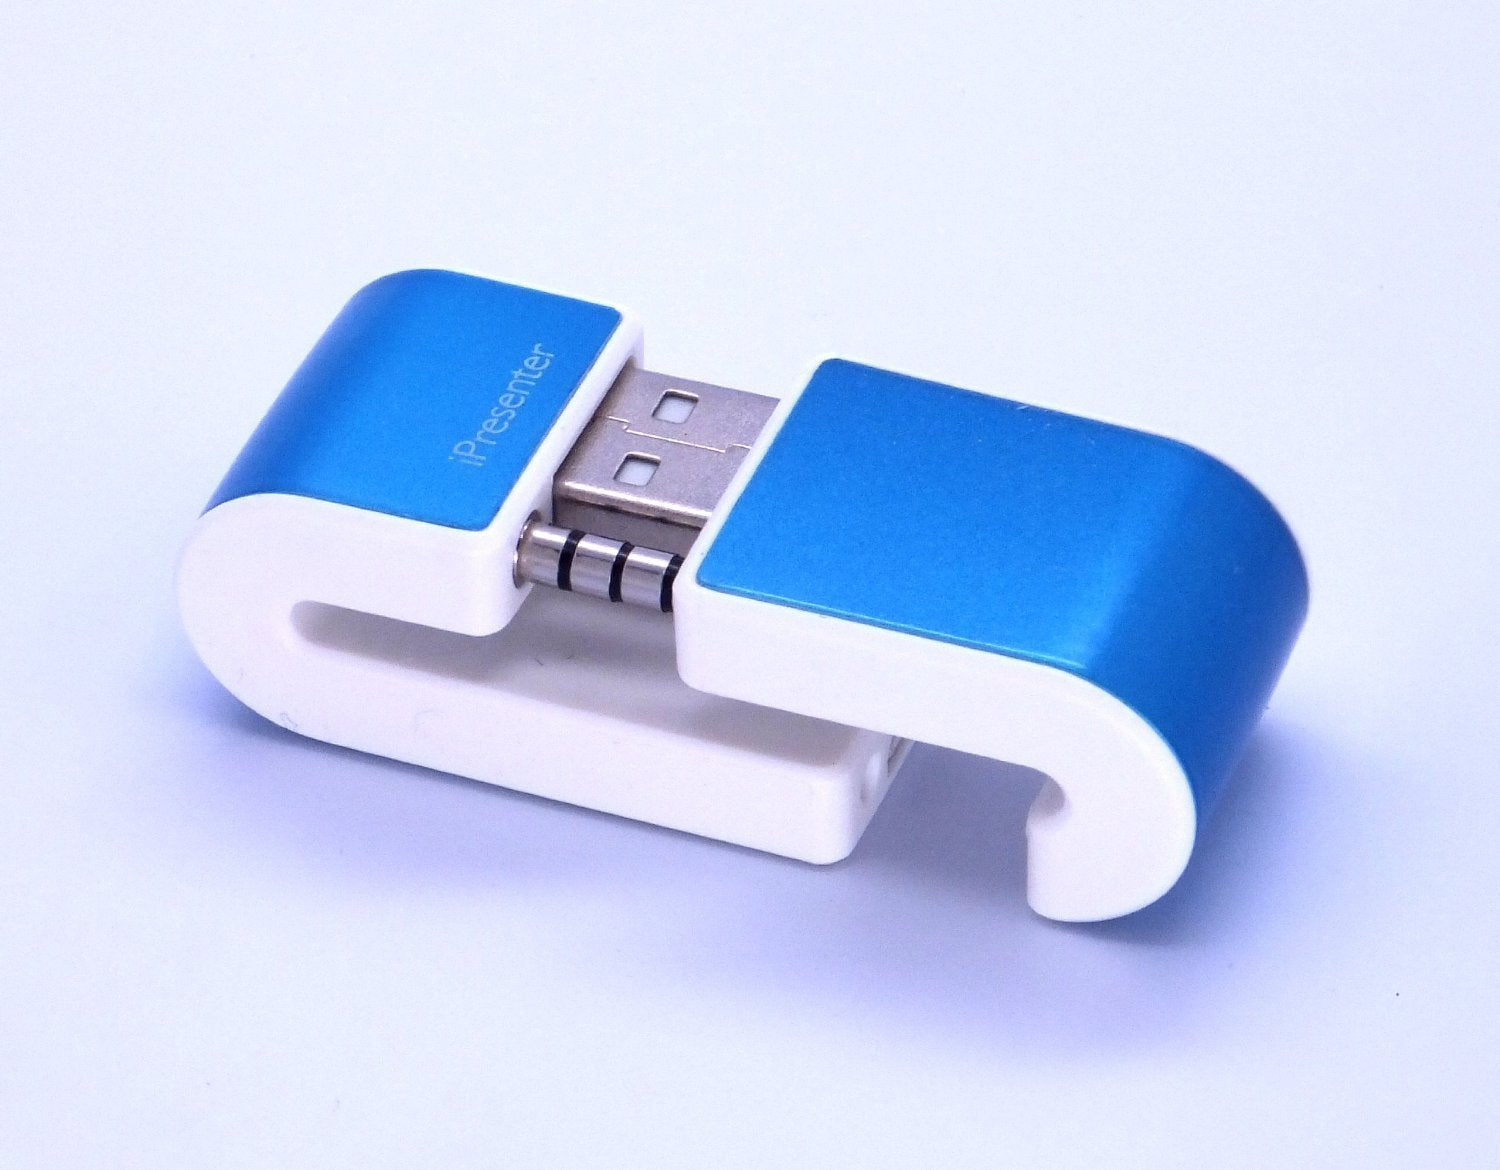 CyberTech iPresenter Wireless Presenter Remote/ Air Mouse for iPhone 4/5, Free App download, Compact Size,